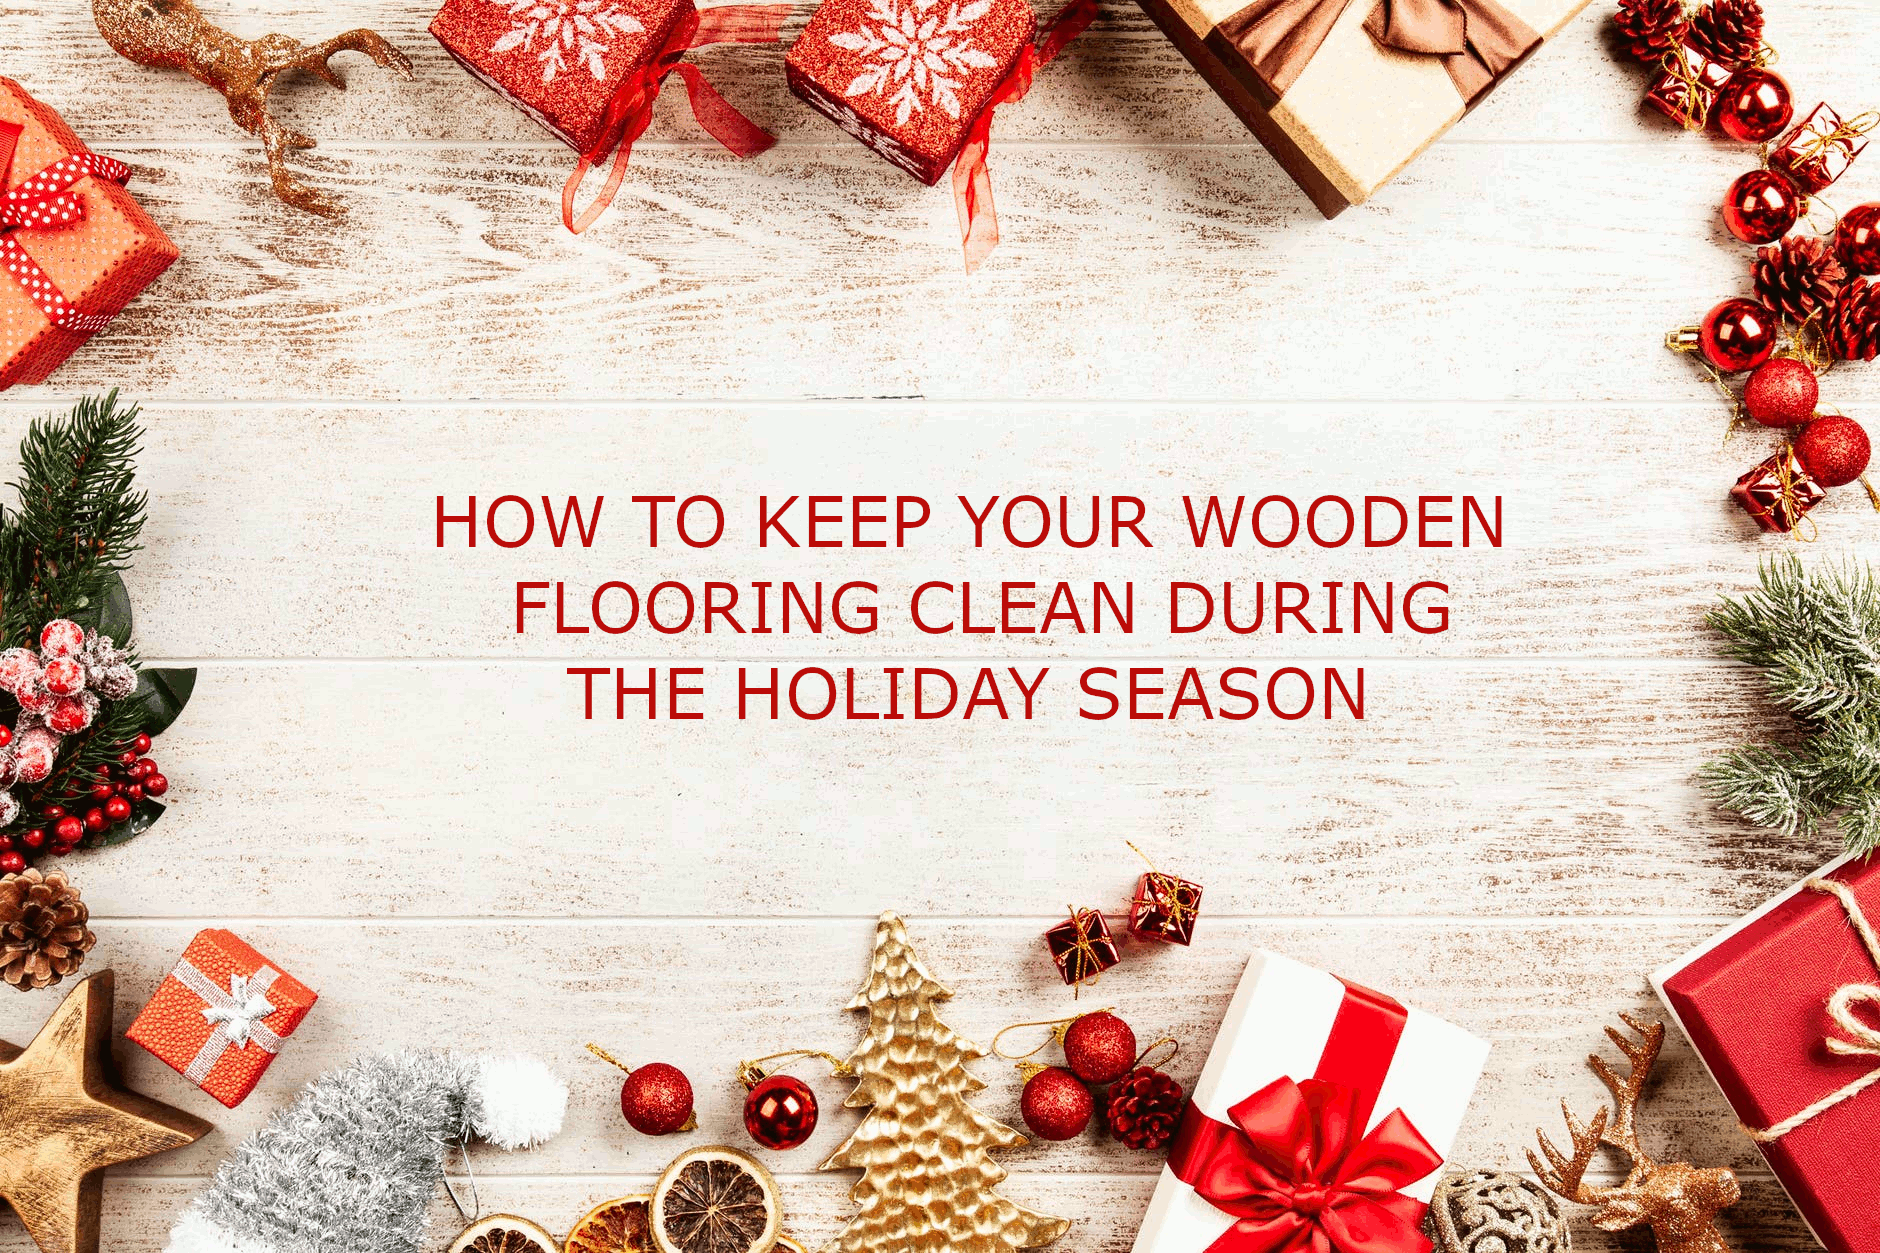 How to keep your wooden floor clean during the holiday season